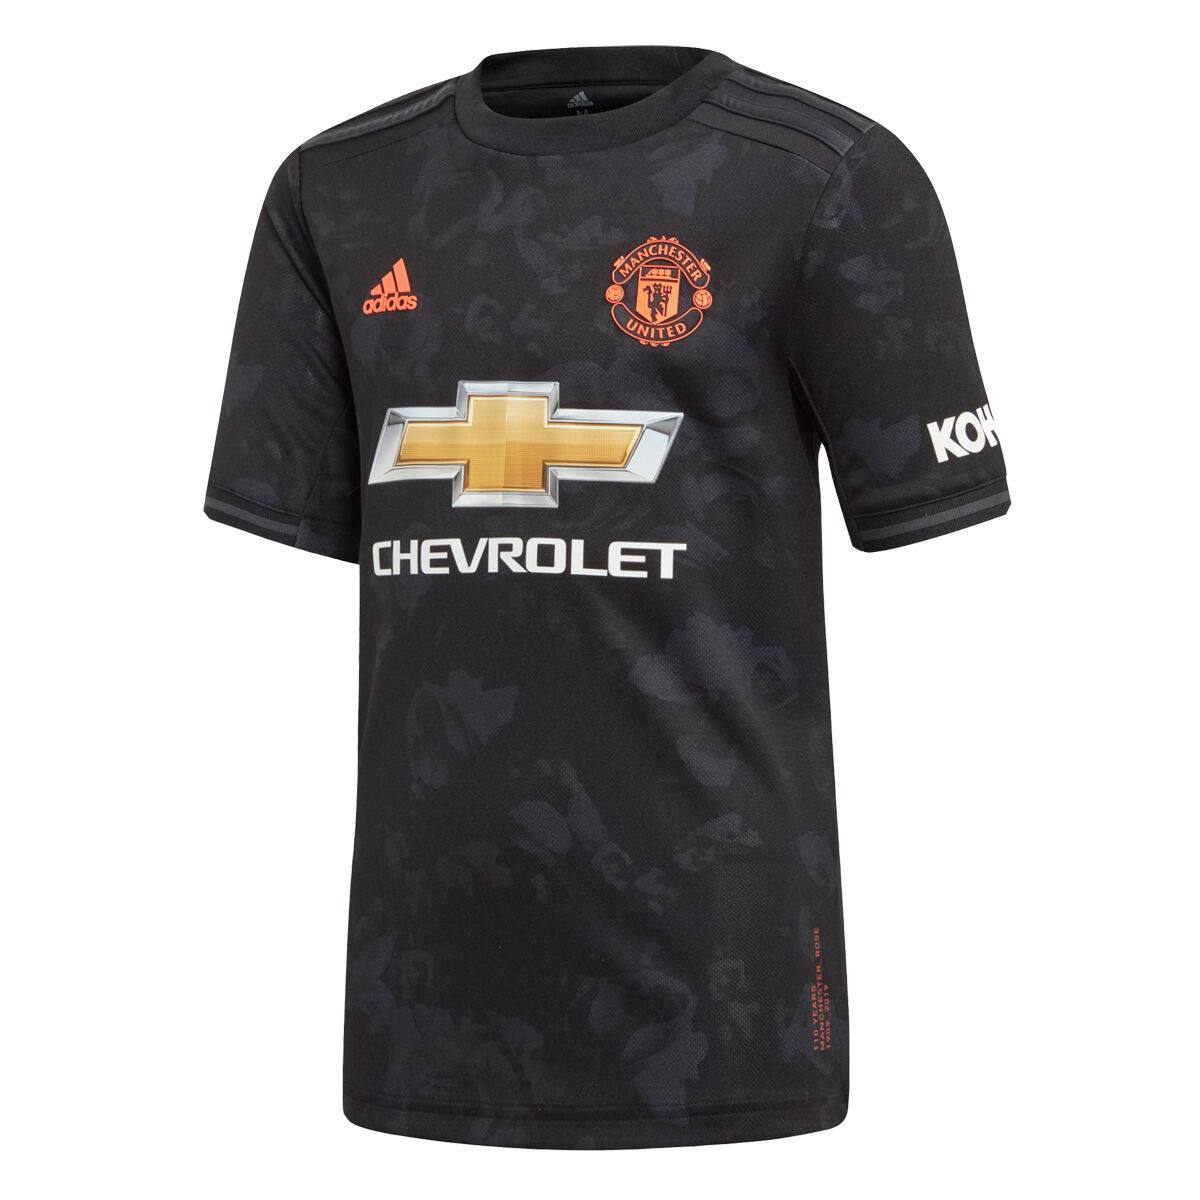 manchester united jersey mens